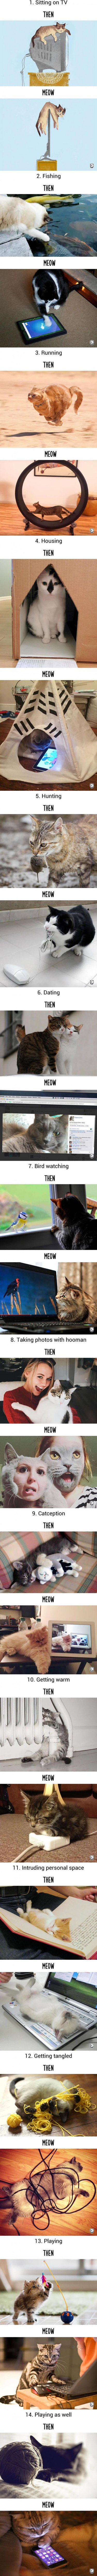 How Technology Has Changed Cats Lives - Then Vs Meow